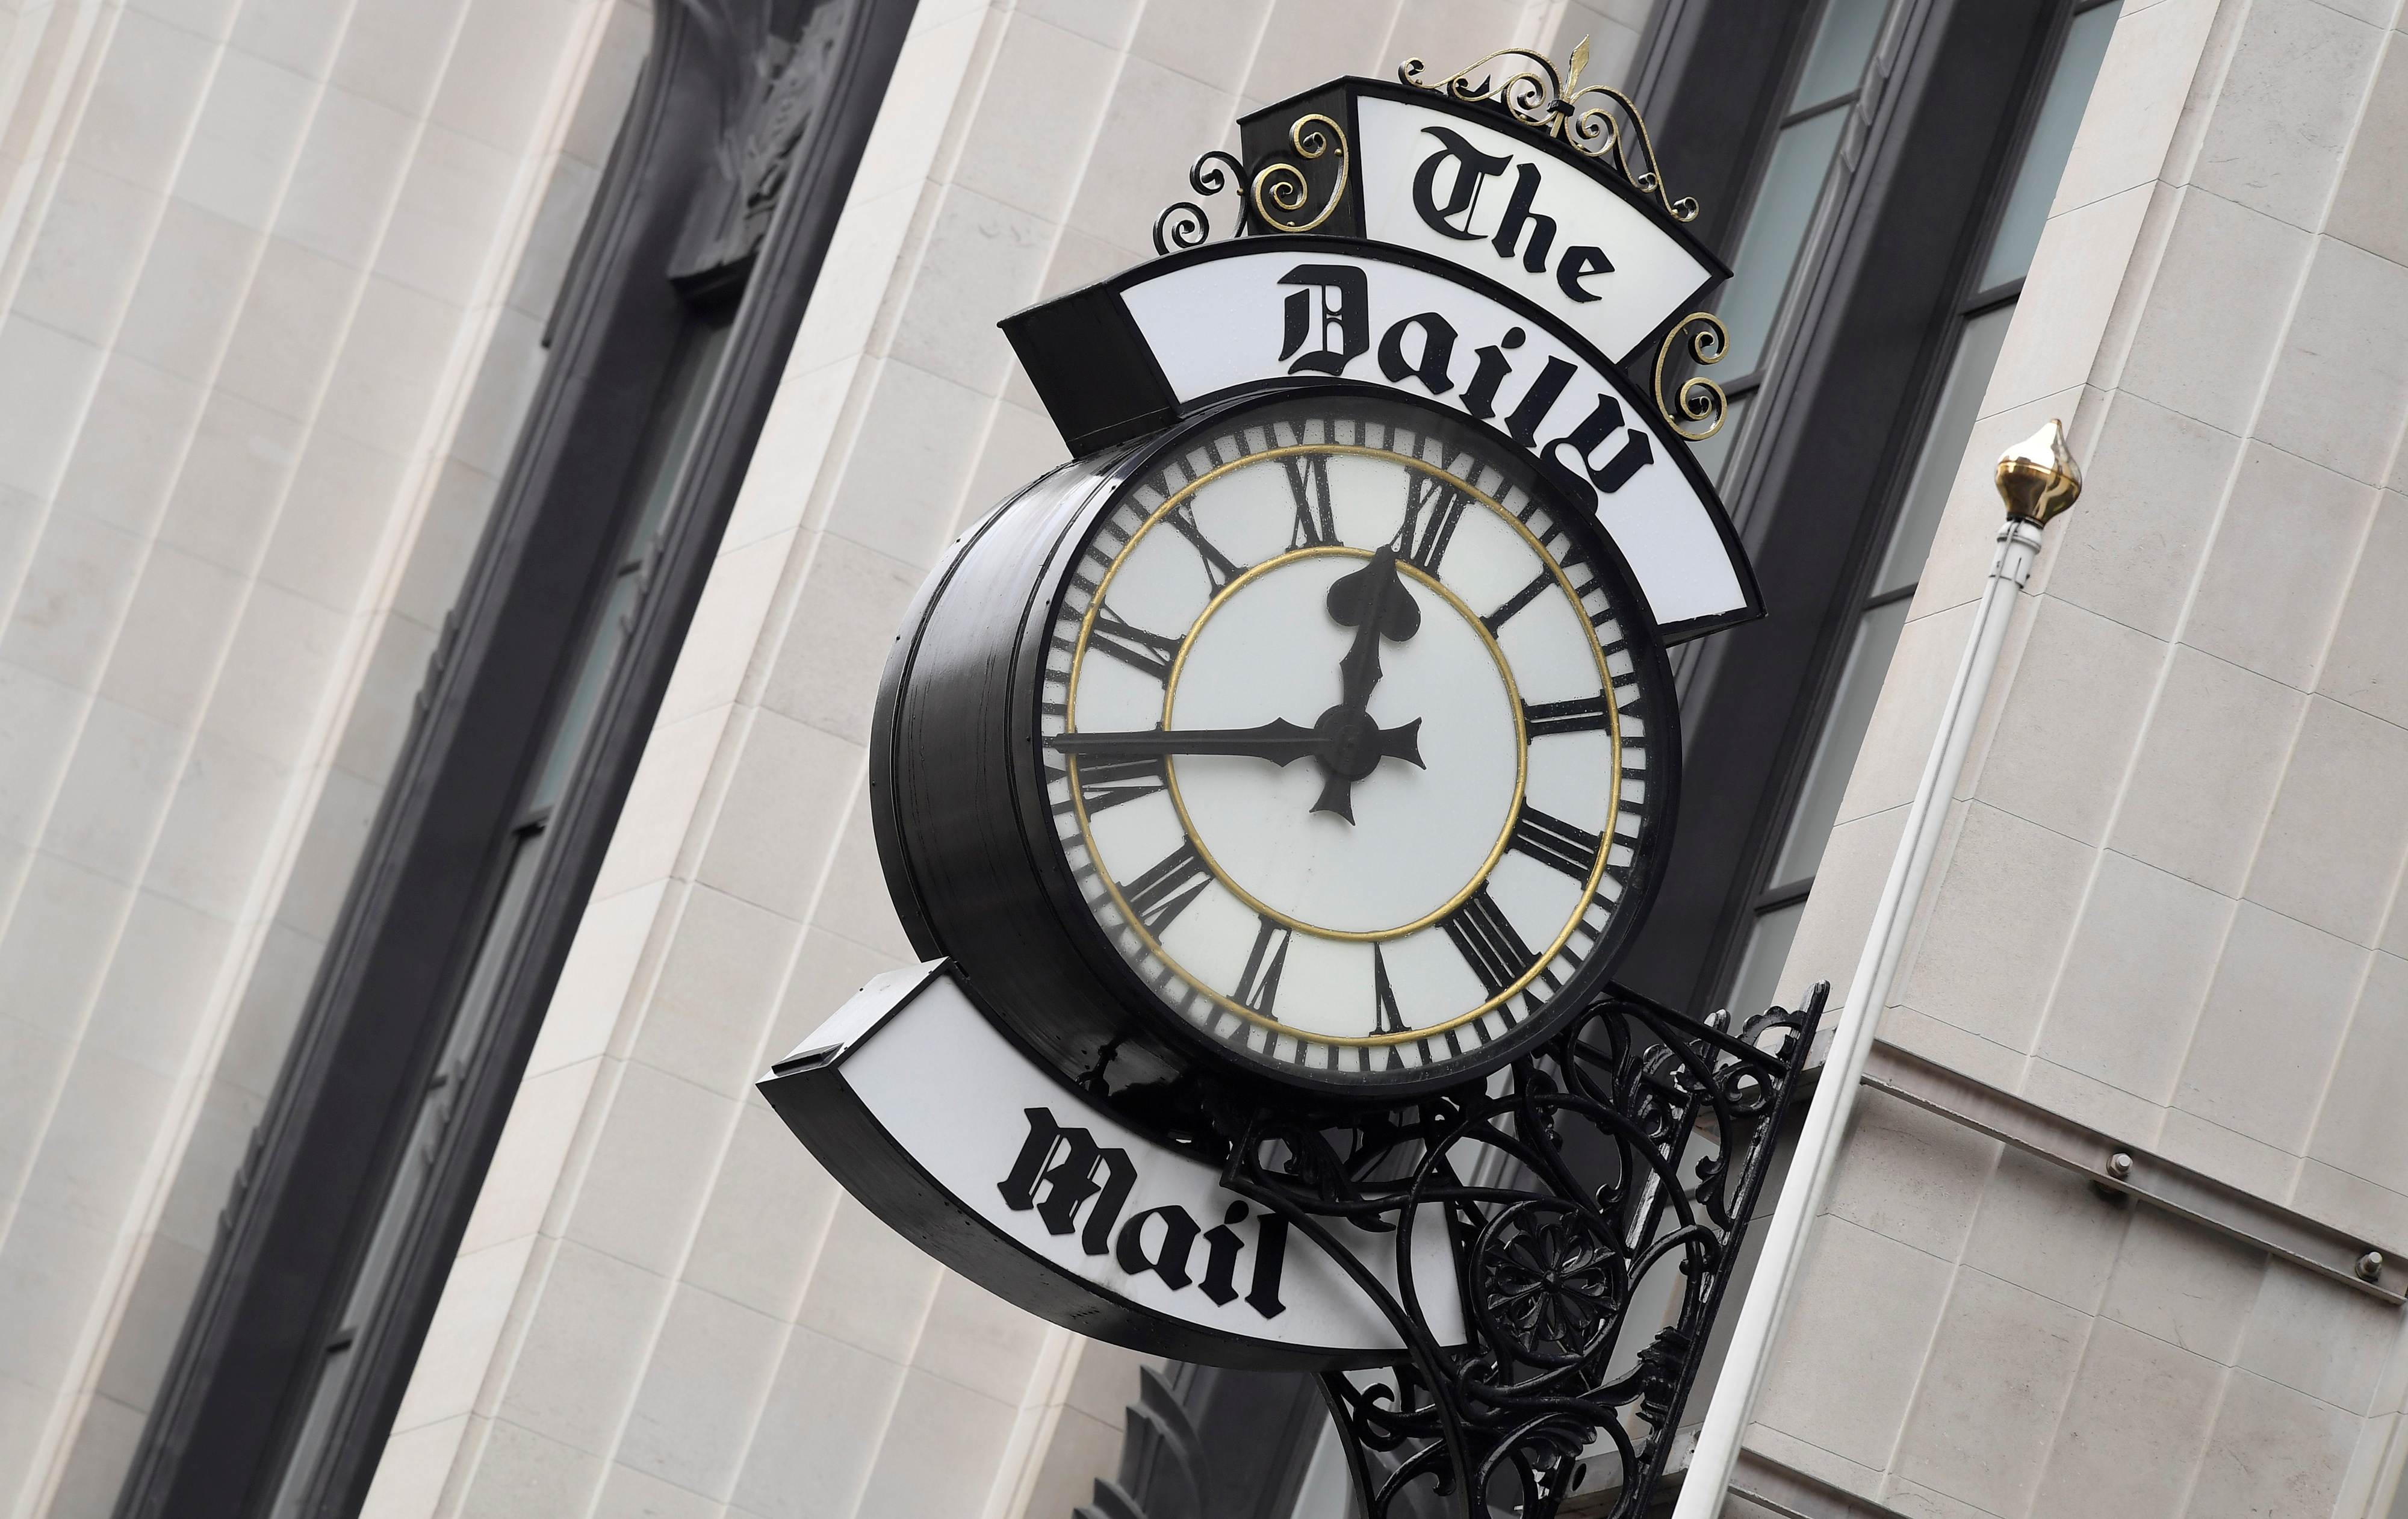 A clock face is seen outside of the London offices of the Daily Mail newspaper in London, Britain, April 28, 2018. REUTERS/Toby Melville/File Photo